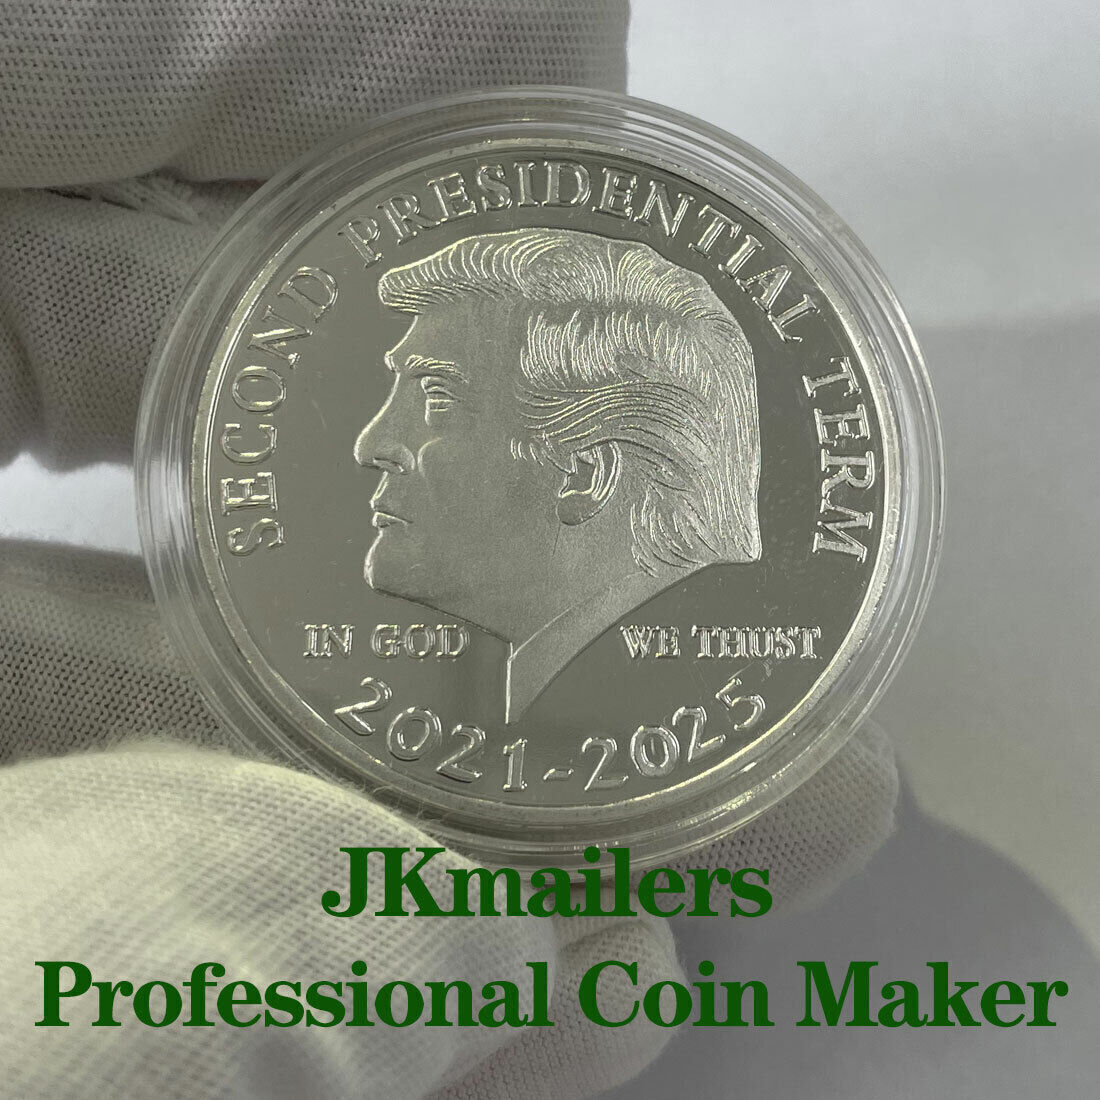 2021-2025 Donald Trump Coin President Coin IN GOD WE TRUST Coins （Silver） US